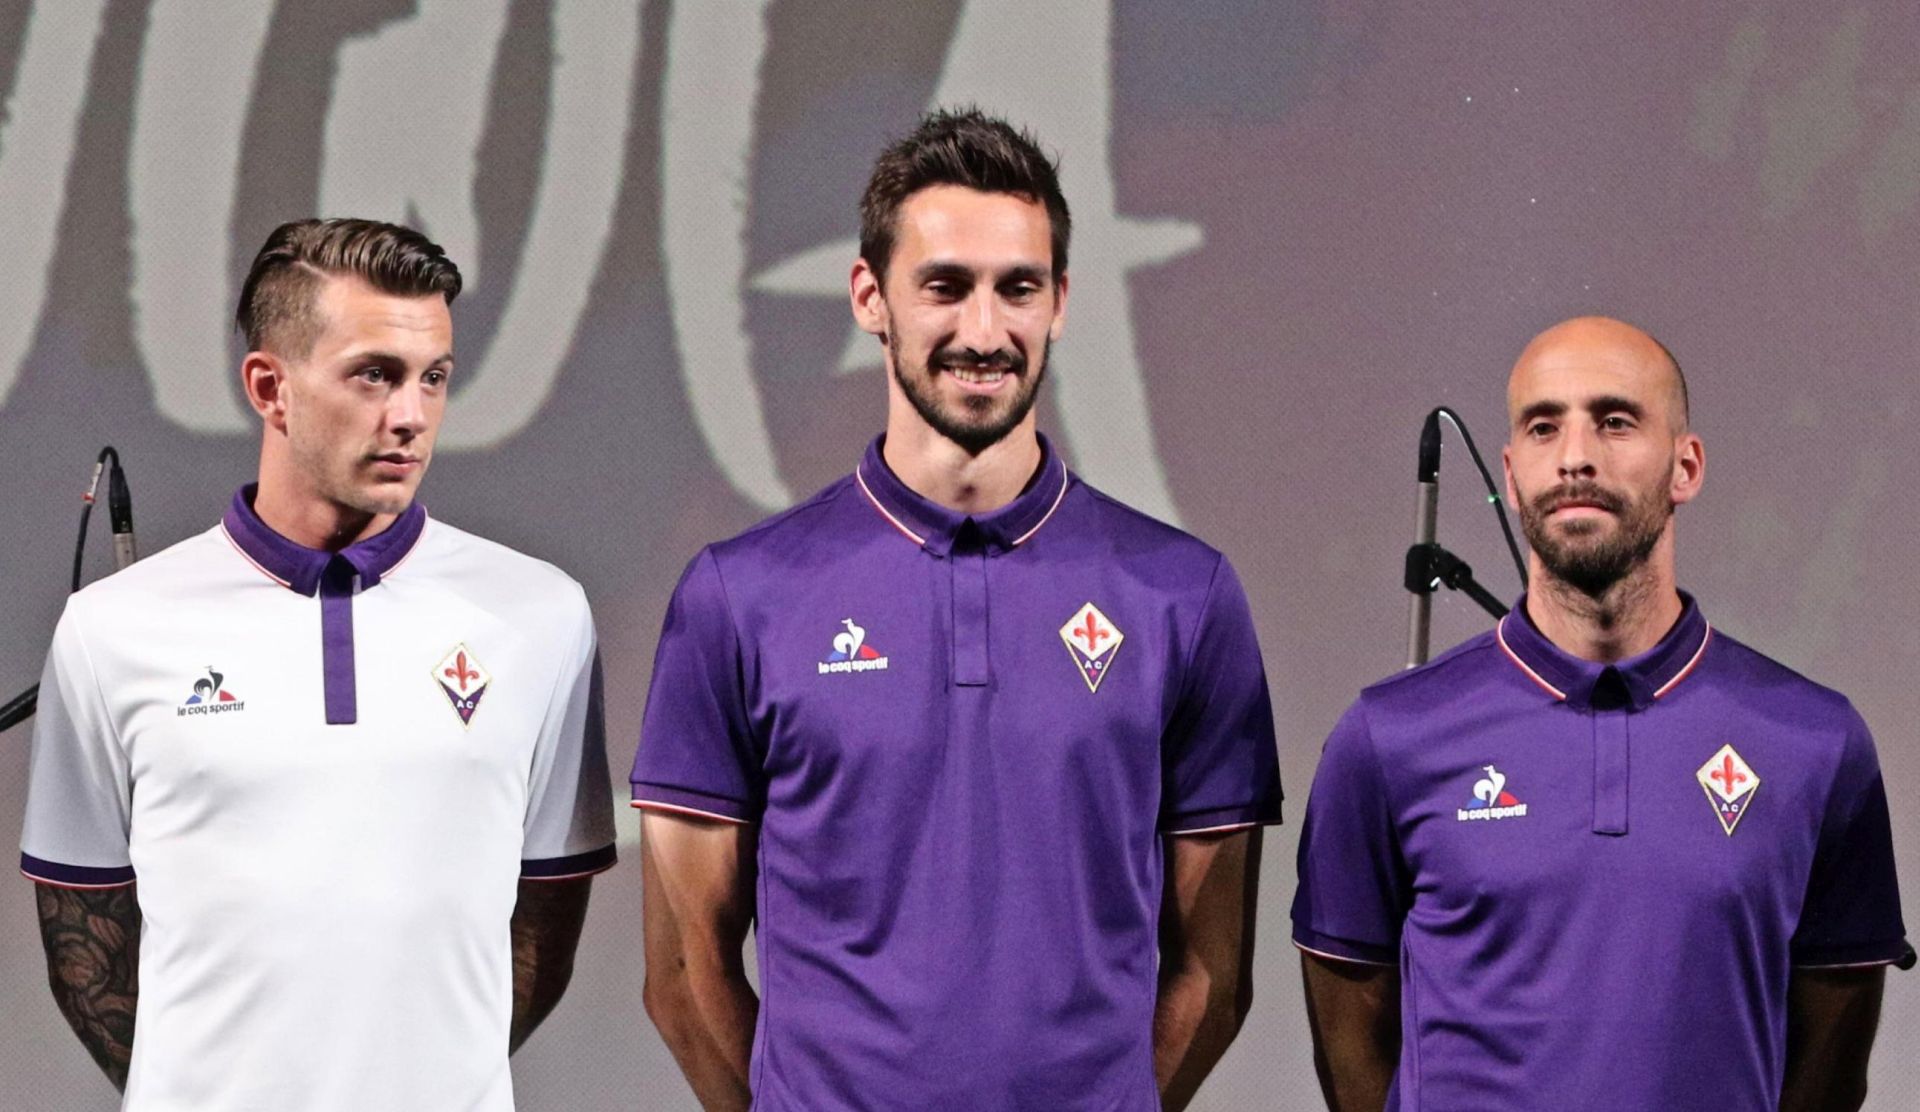 epa06578791 (FILE) Fiorentina player Davide Astori (C) during the presentation of the new Fiorentina jersey in Florence, Italy, 19 May 2016 (reissued 04 March 2018). The 31-year-old Astori was found dead in a hotel room.  EPA/MAURIZIO DEGL' INNOCENTI